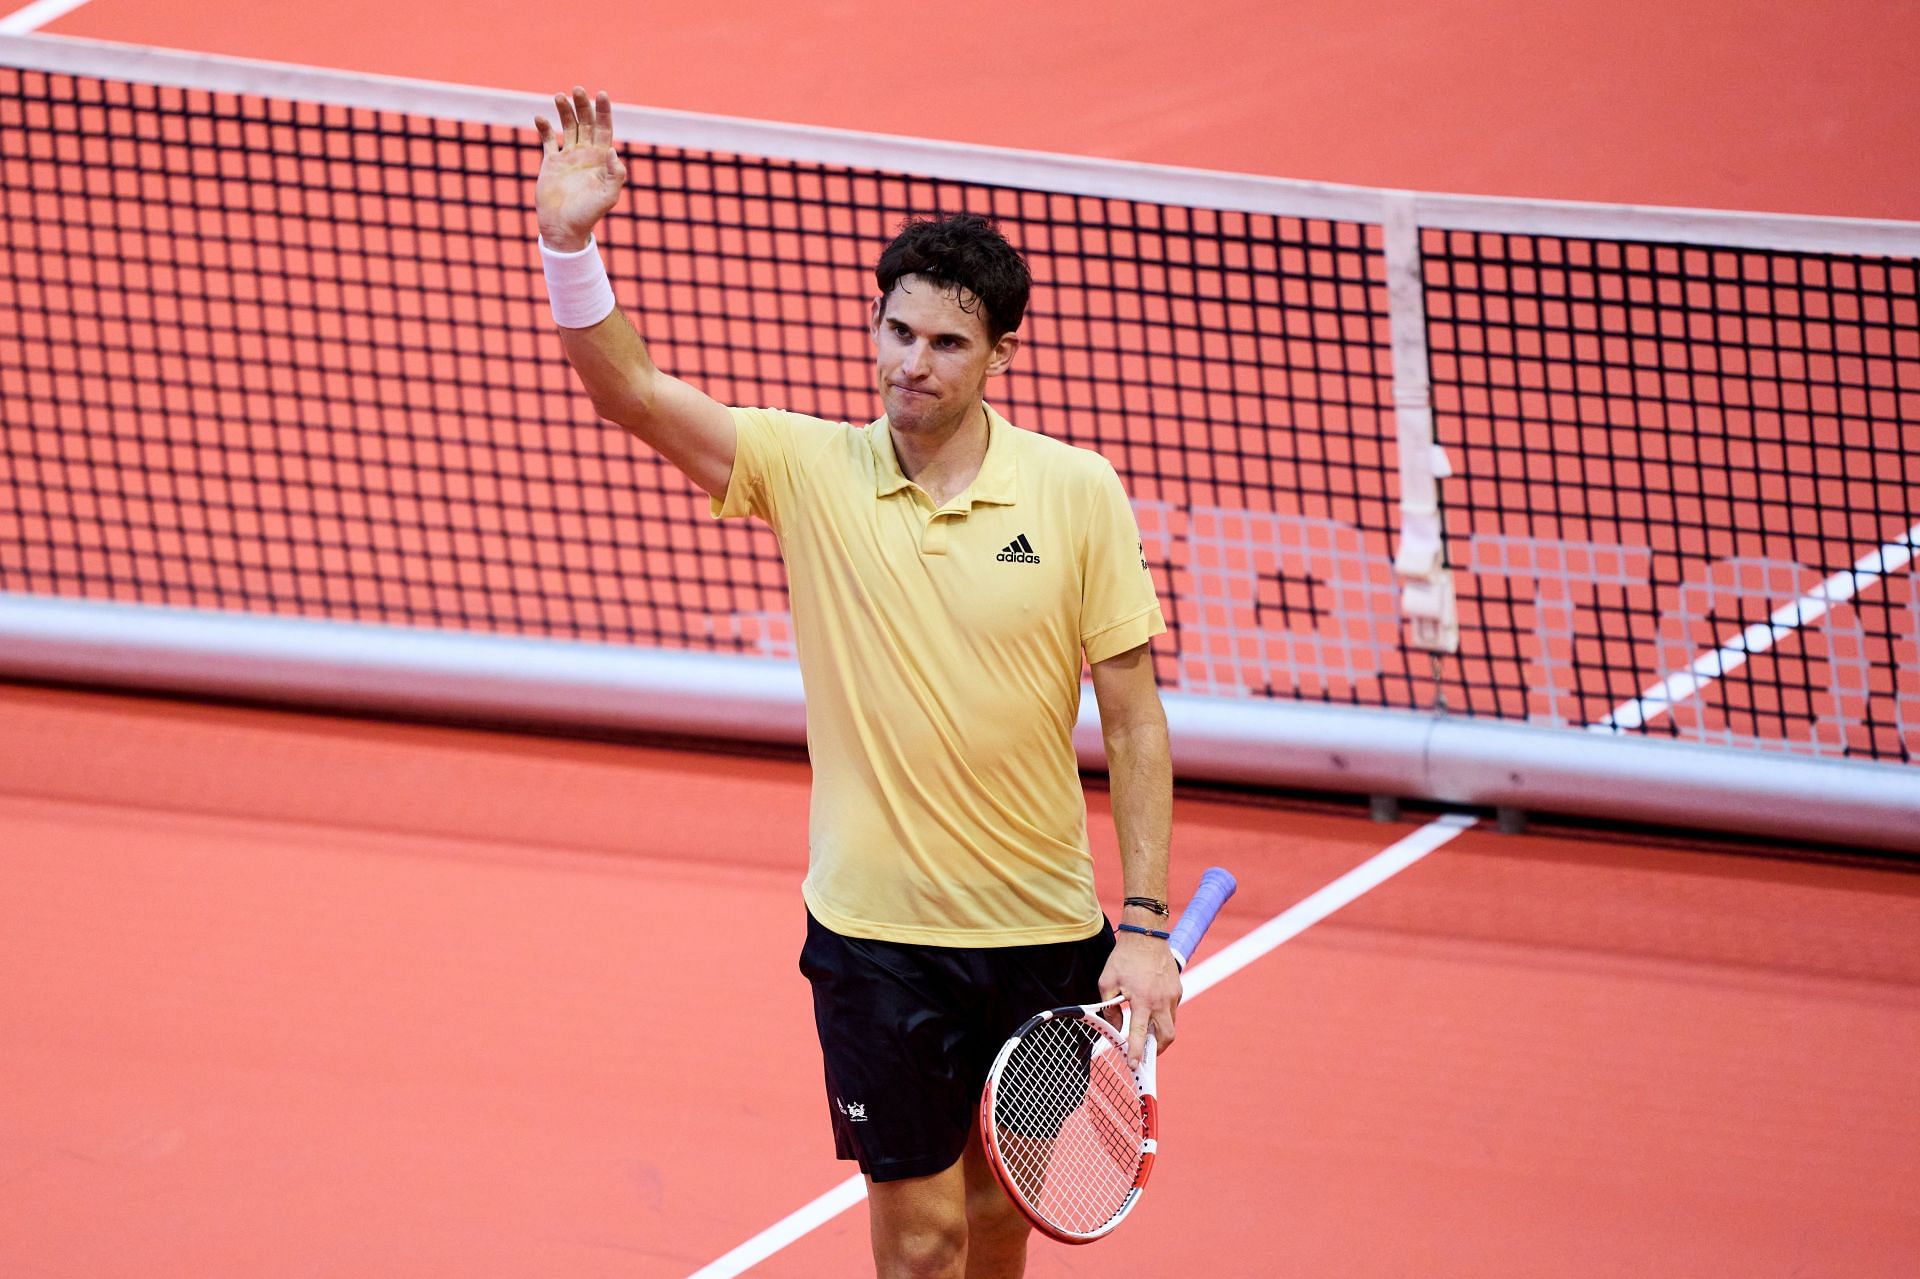 Gijon Open 2022 Dominic Thiem vs Marcos Giron preview, head-to-head, prediction, odds and pick